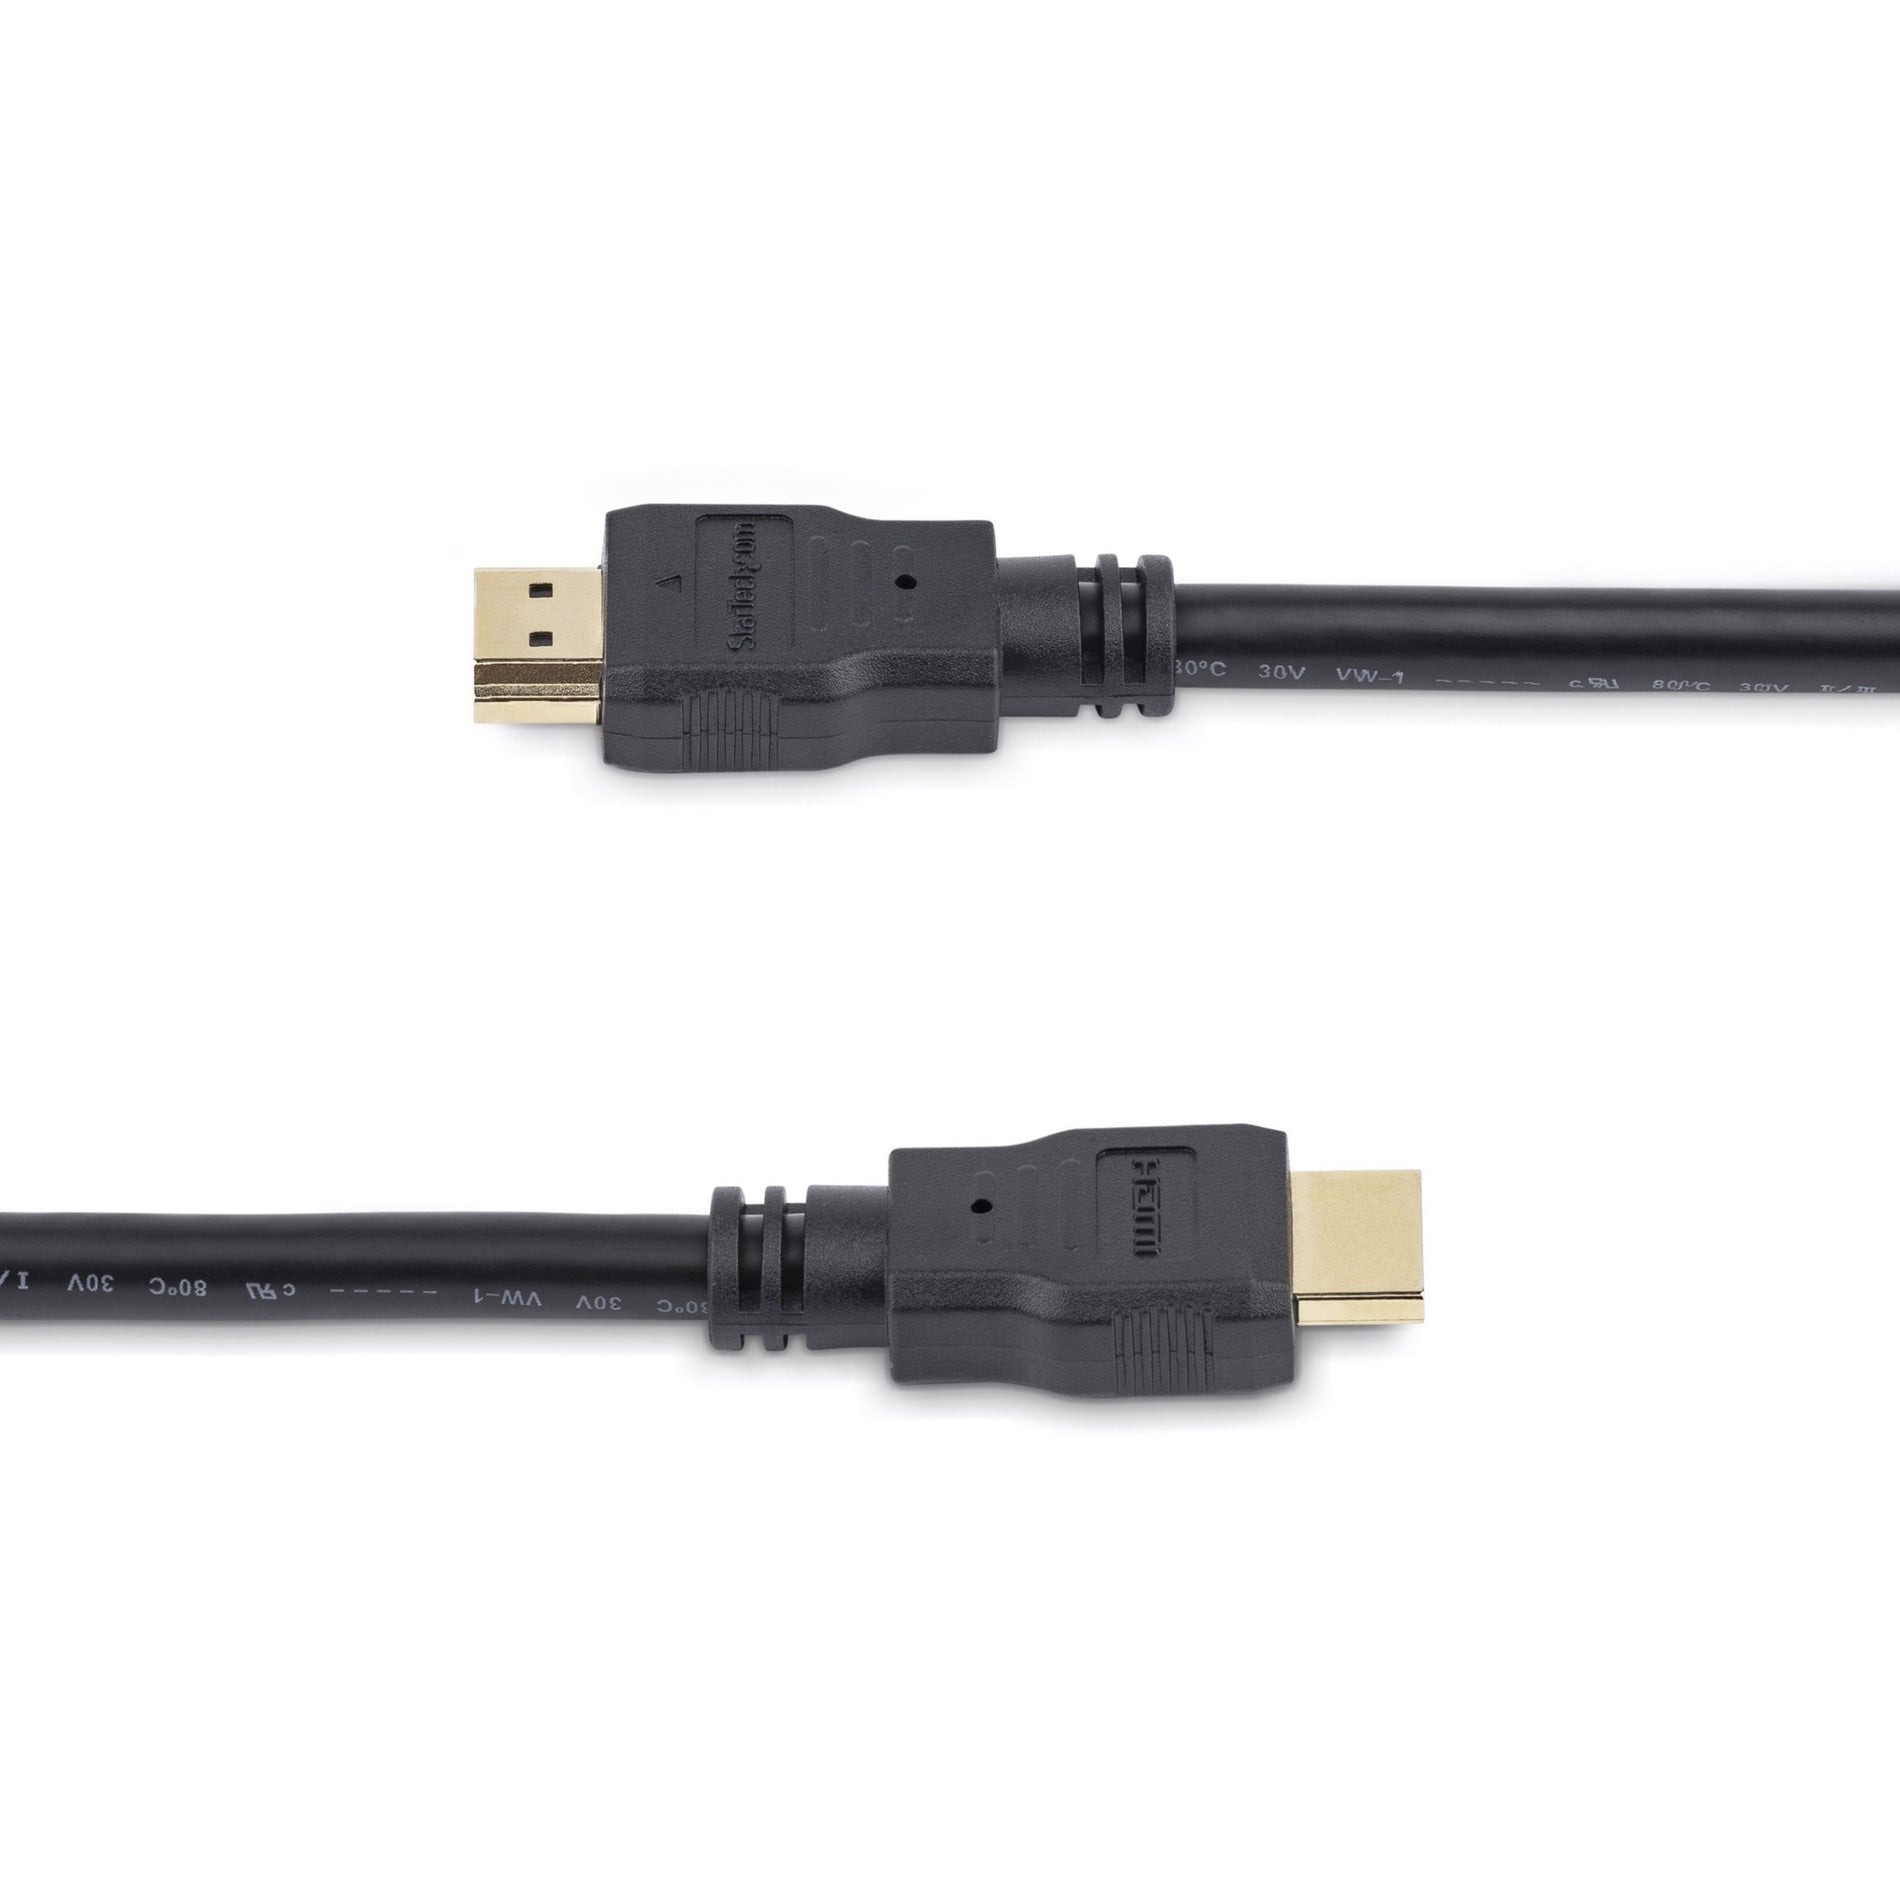 StarTech.com HDMM50CM 0.5m High Speed HDMI Cable - Ultra HD 4k x 2k HDMI Cable, Strain Relief, Corrosion Resistant, Molded, Gold Plated Connectors